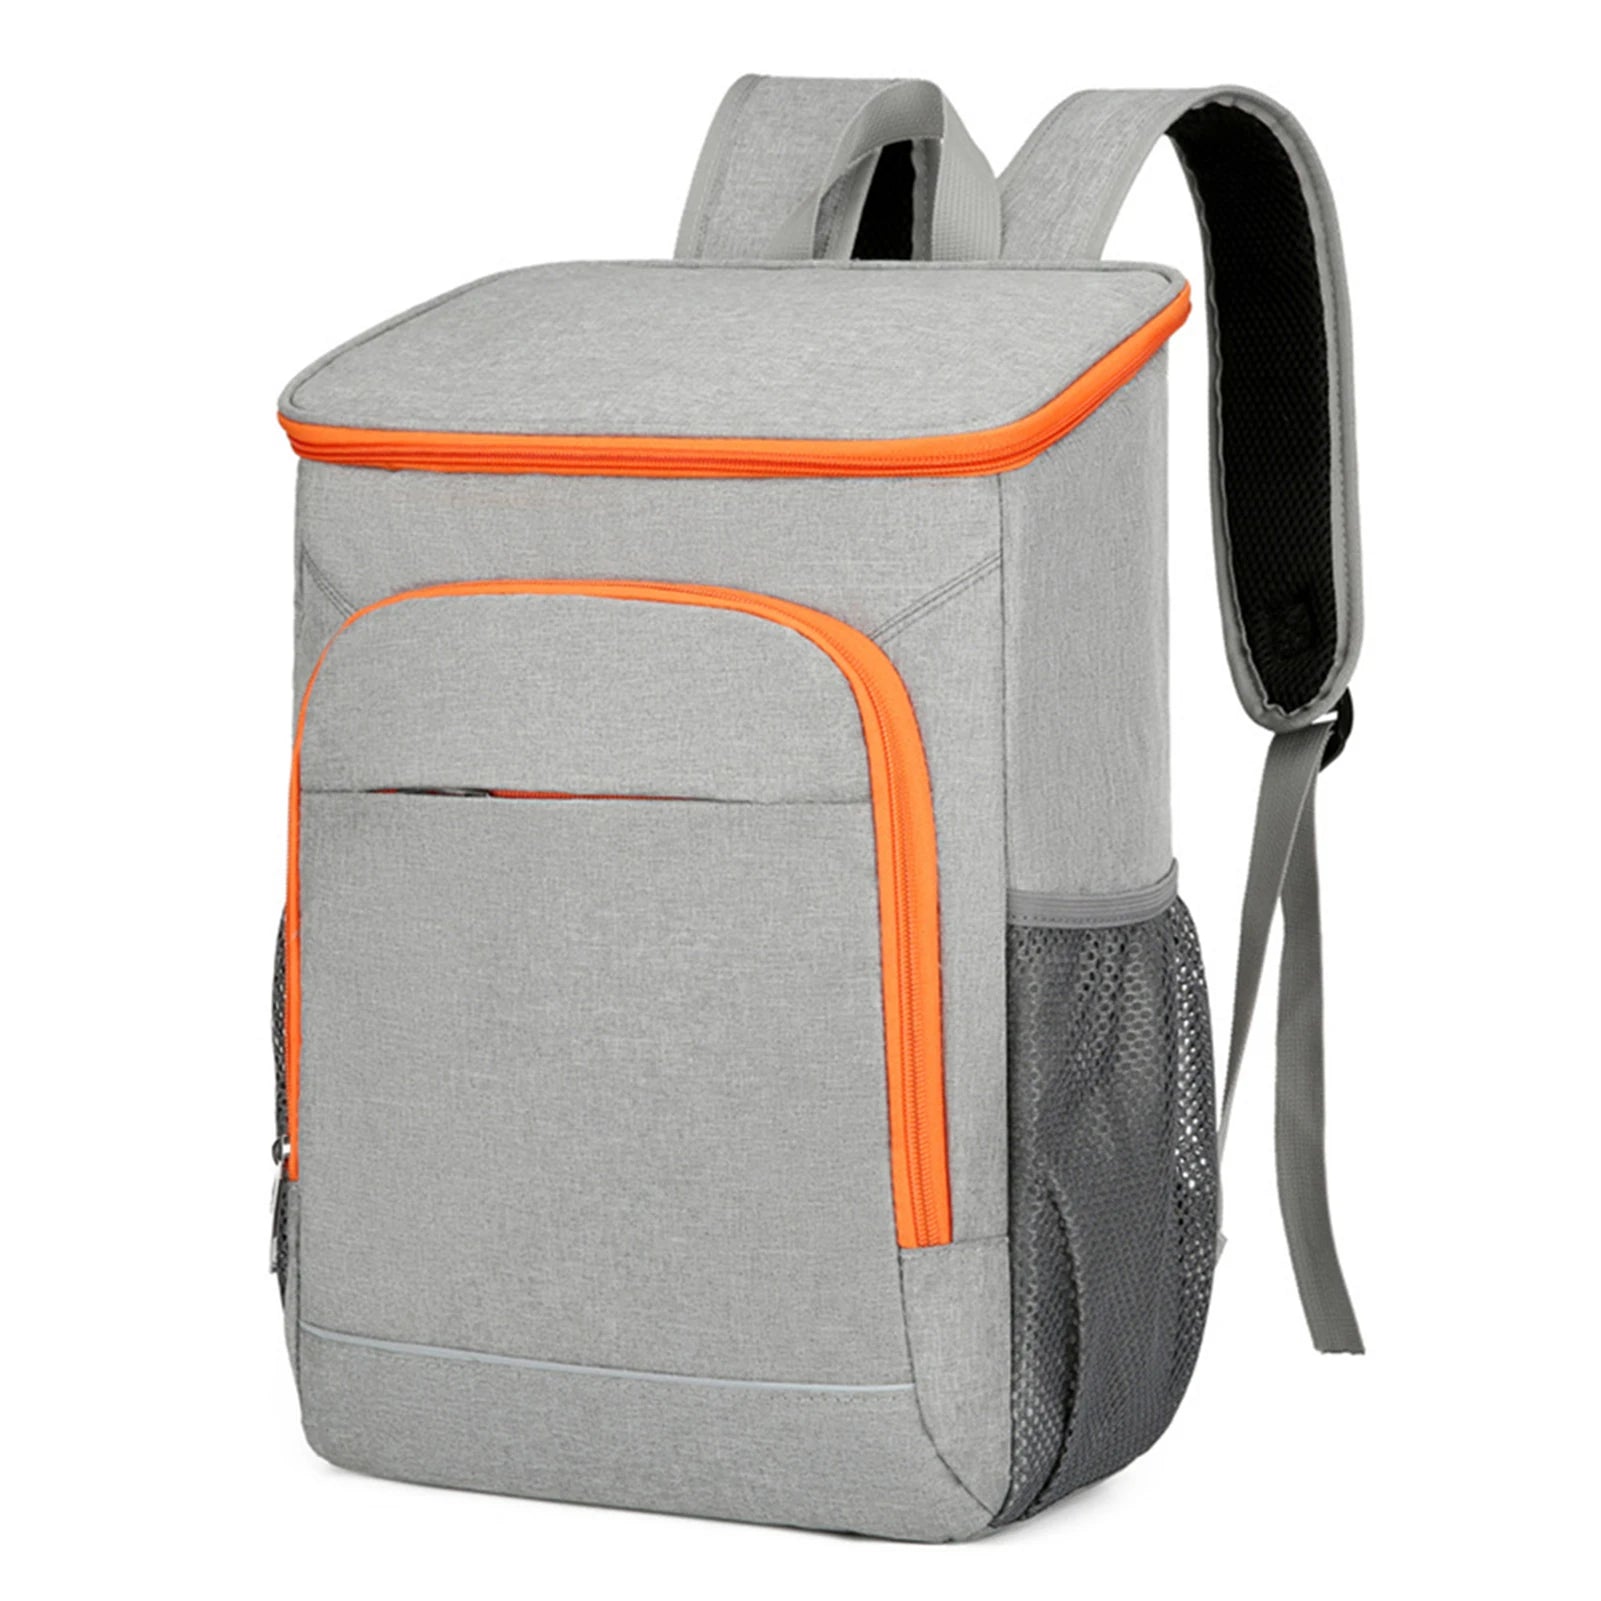 30L Insulated Cooler Backpack - Perfect for Women Who Love Adventure